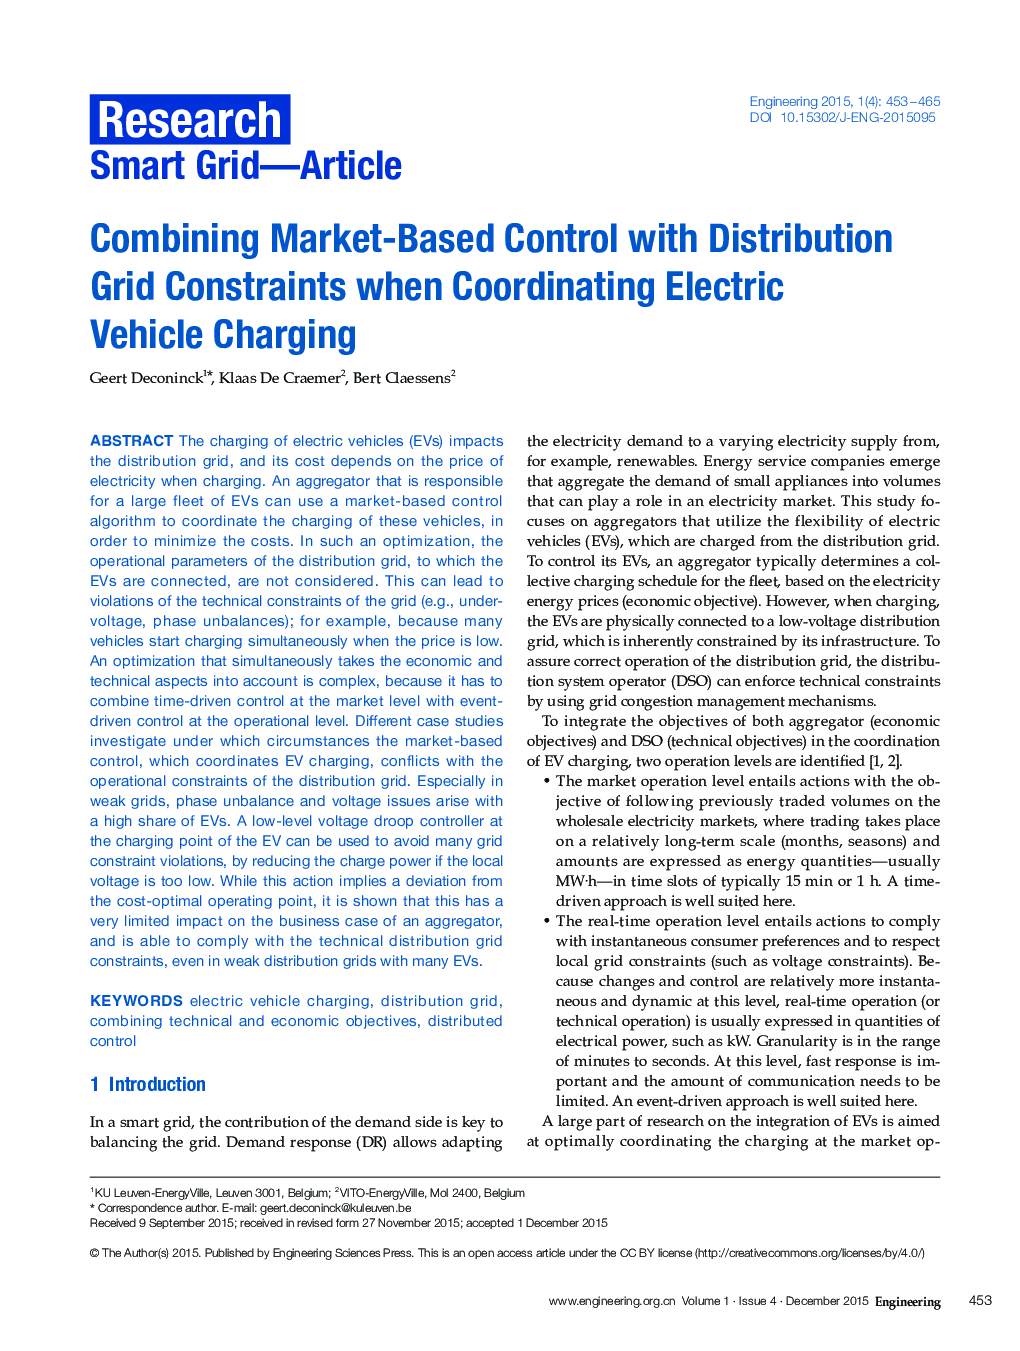 Combining Market-Based Control with Distribution Grid Constraints when Coordinating Electric Vehicle Charging